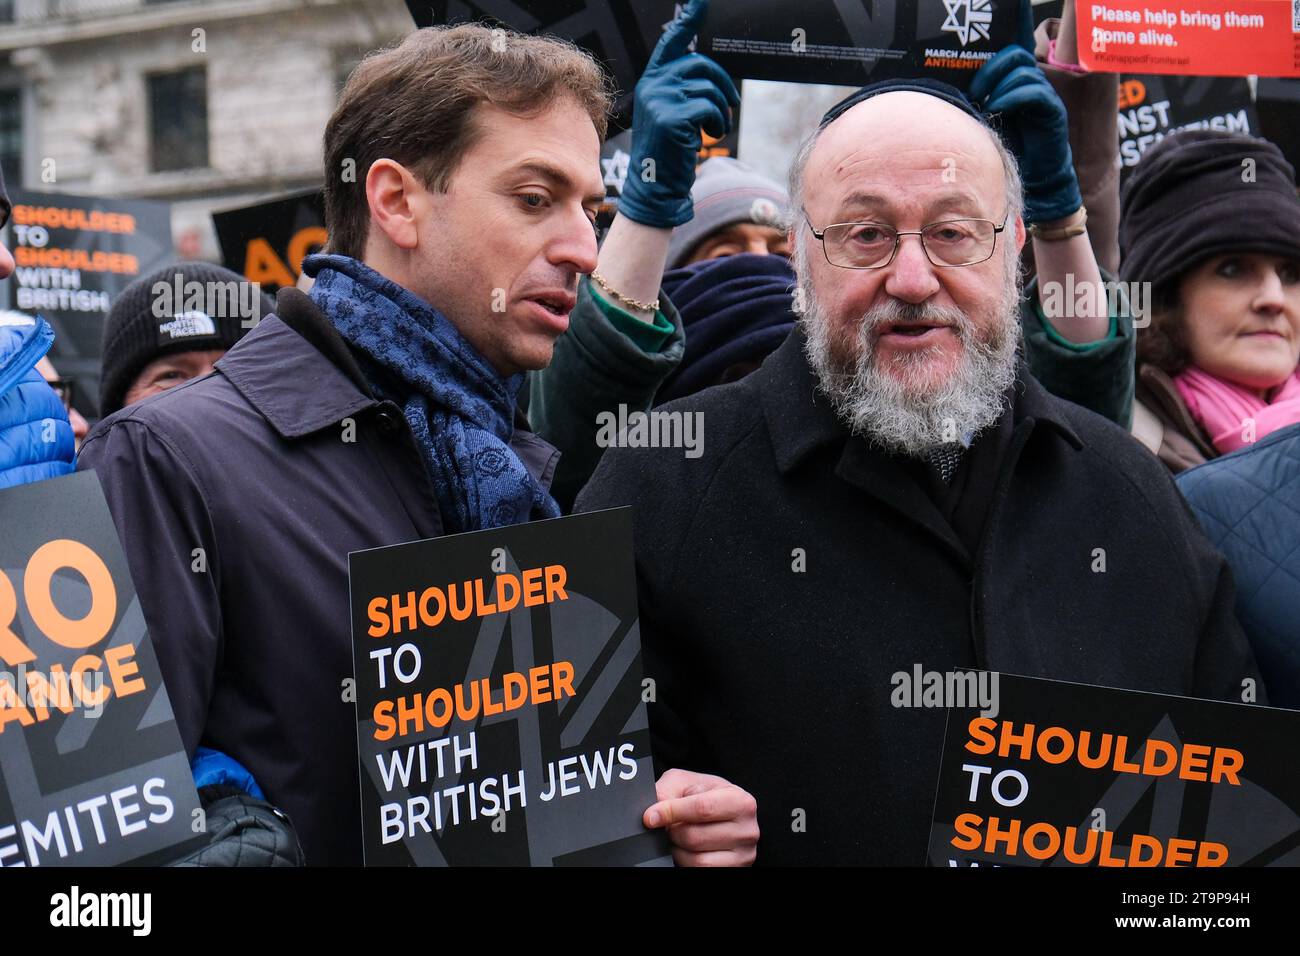 London, UK. 26th November, 2023. (L)Campaign Against Antisemitism's Gideon Falter and (R)Chief Rabbi Ephraim Mirvis lead tens of thousands in the March Against Antisemitism in central London, on a route from the Royal Courts of Justice, through to Parliament Square. The rally is said to be the largest of its kind since the Battle of Cable Street in 1936. Credit: Eleventh Hour Photography/Alamy Live News Stock Photo